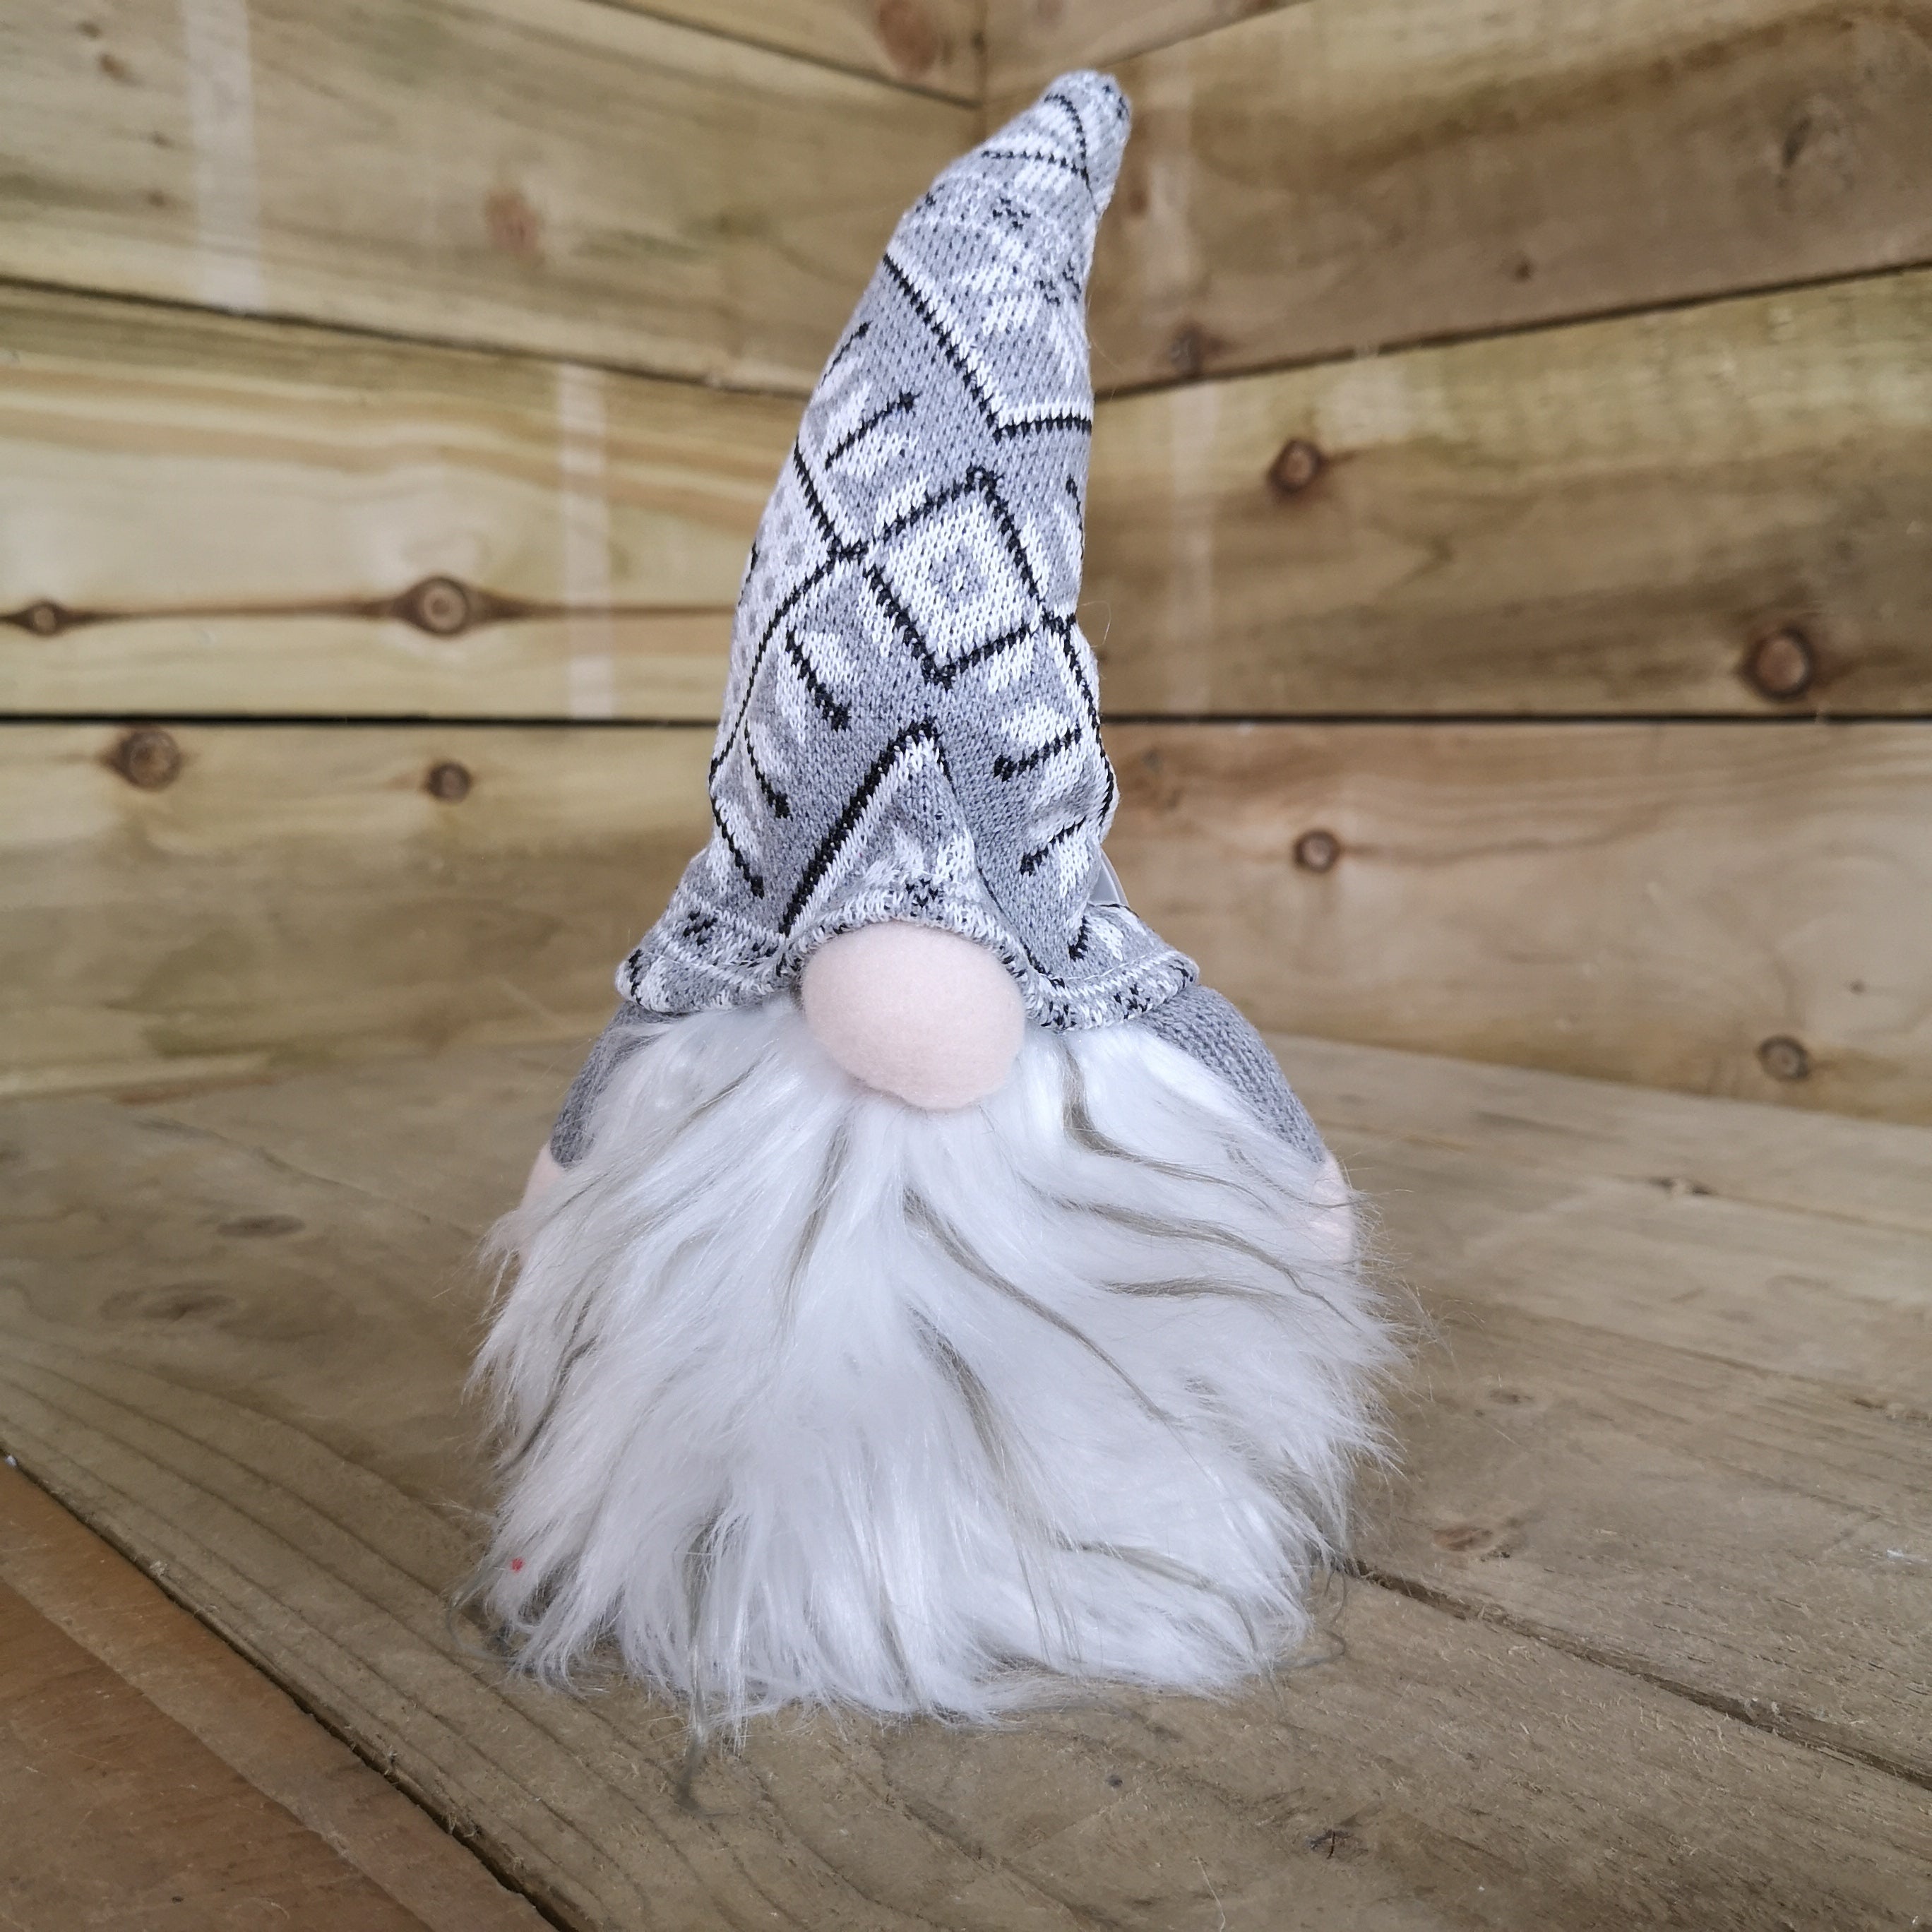 27cm Tall Christmas Light Up Gnome Gonk Nordic Decoration Grey Patterned Hat Sitting